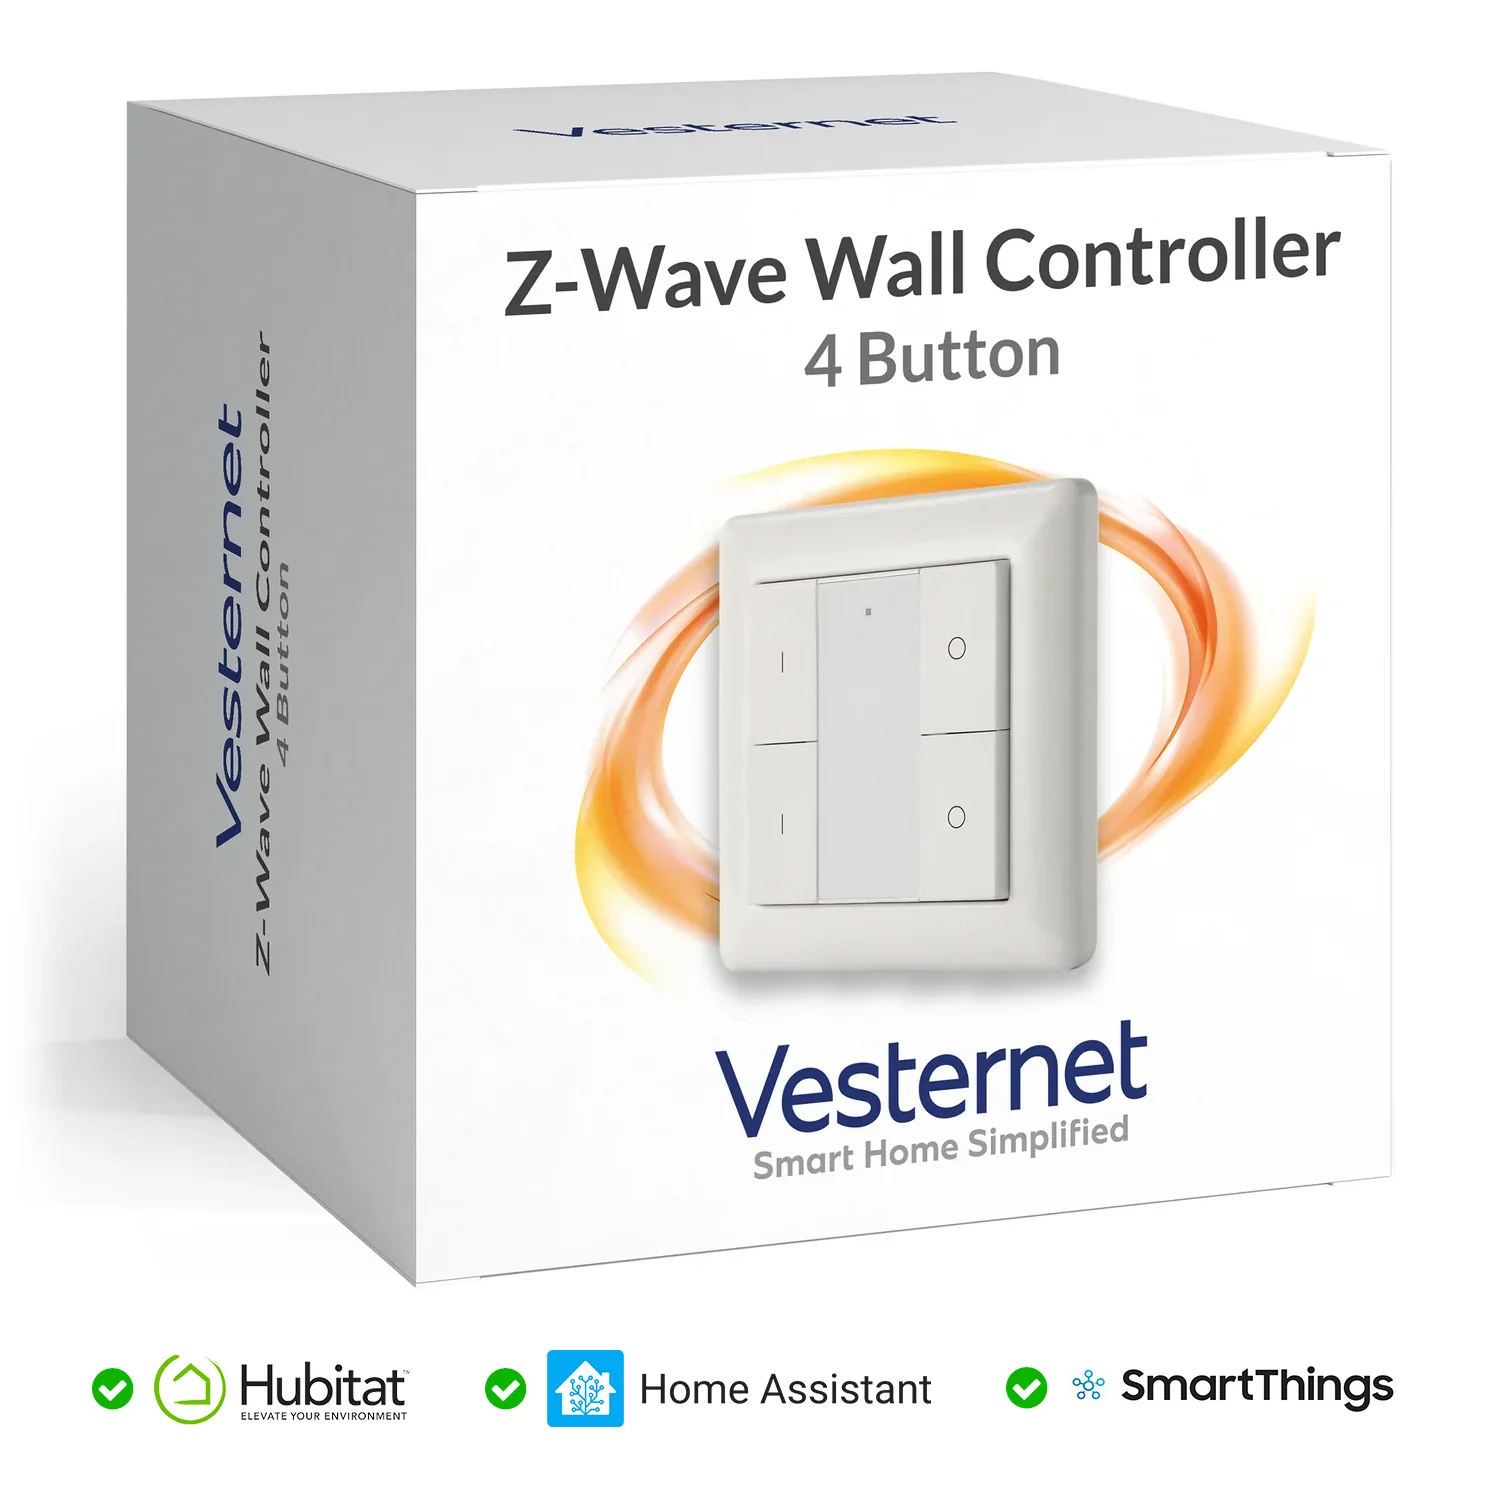 Vesternet Z-Wave Wall Controller - 4 Button Questions & Answers